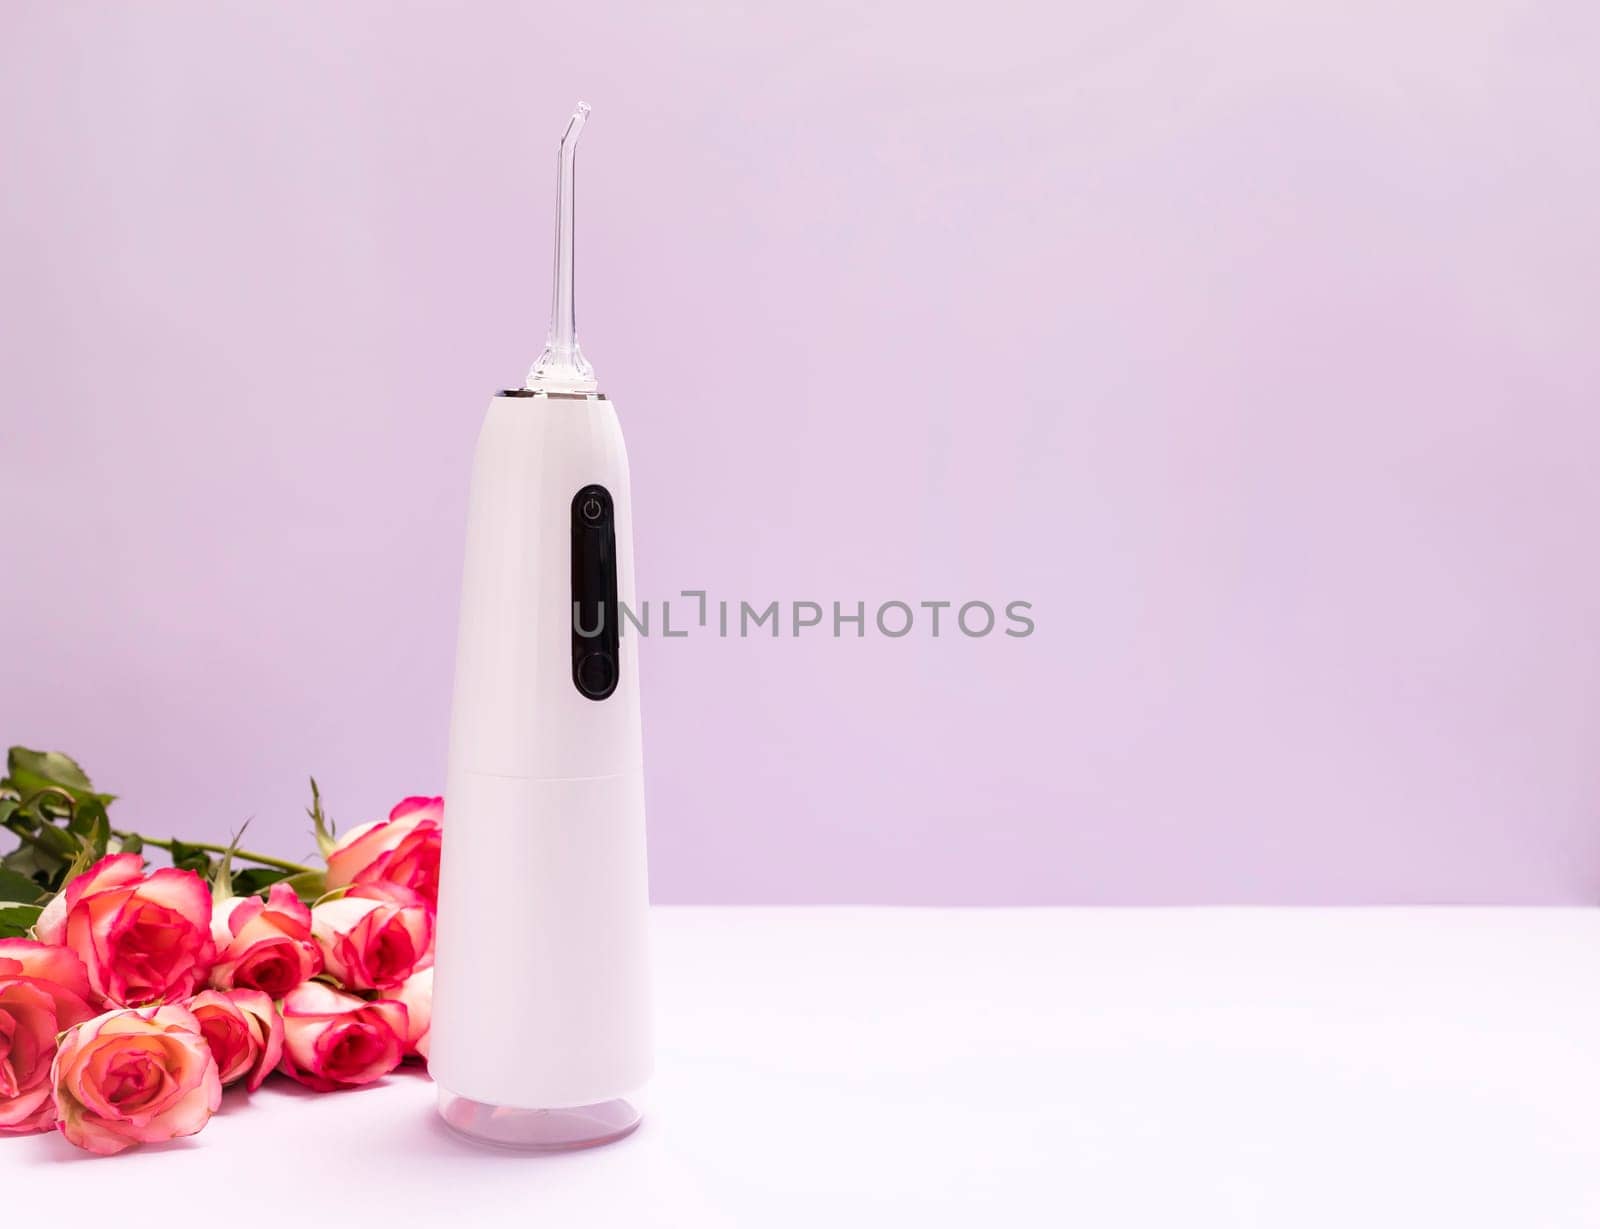 Dental discount, sale. holiday concept. Oral teeth irrigator, roses on purple background. Water tooth cleaner, white portable rechargeable cordless water dental flosser. Home dental care device by netatsi